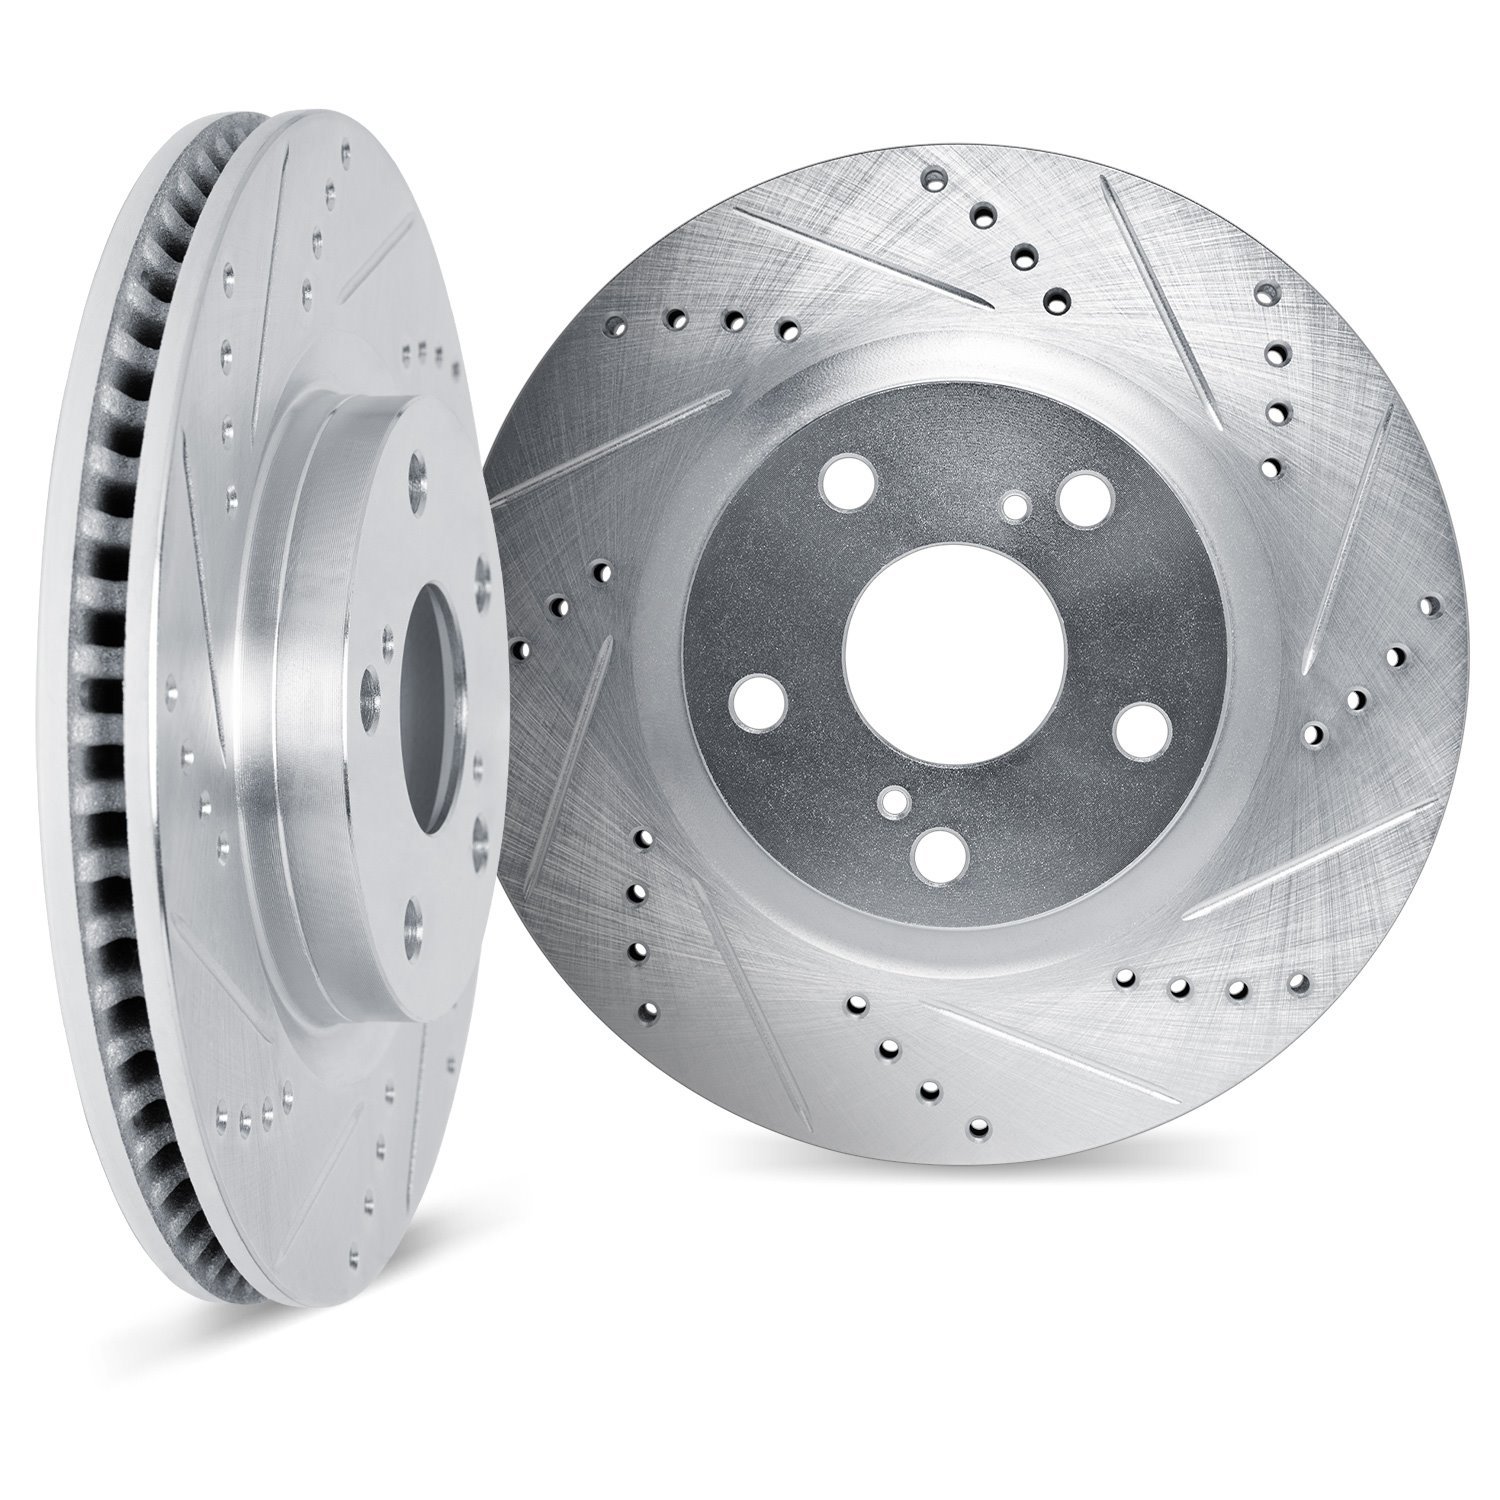 7002-73065 Drilled/Slotted Brake Rotors [Silver], 1990-1997 Audi/Volkswagen, Position: Rear